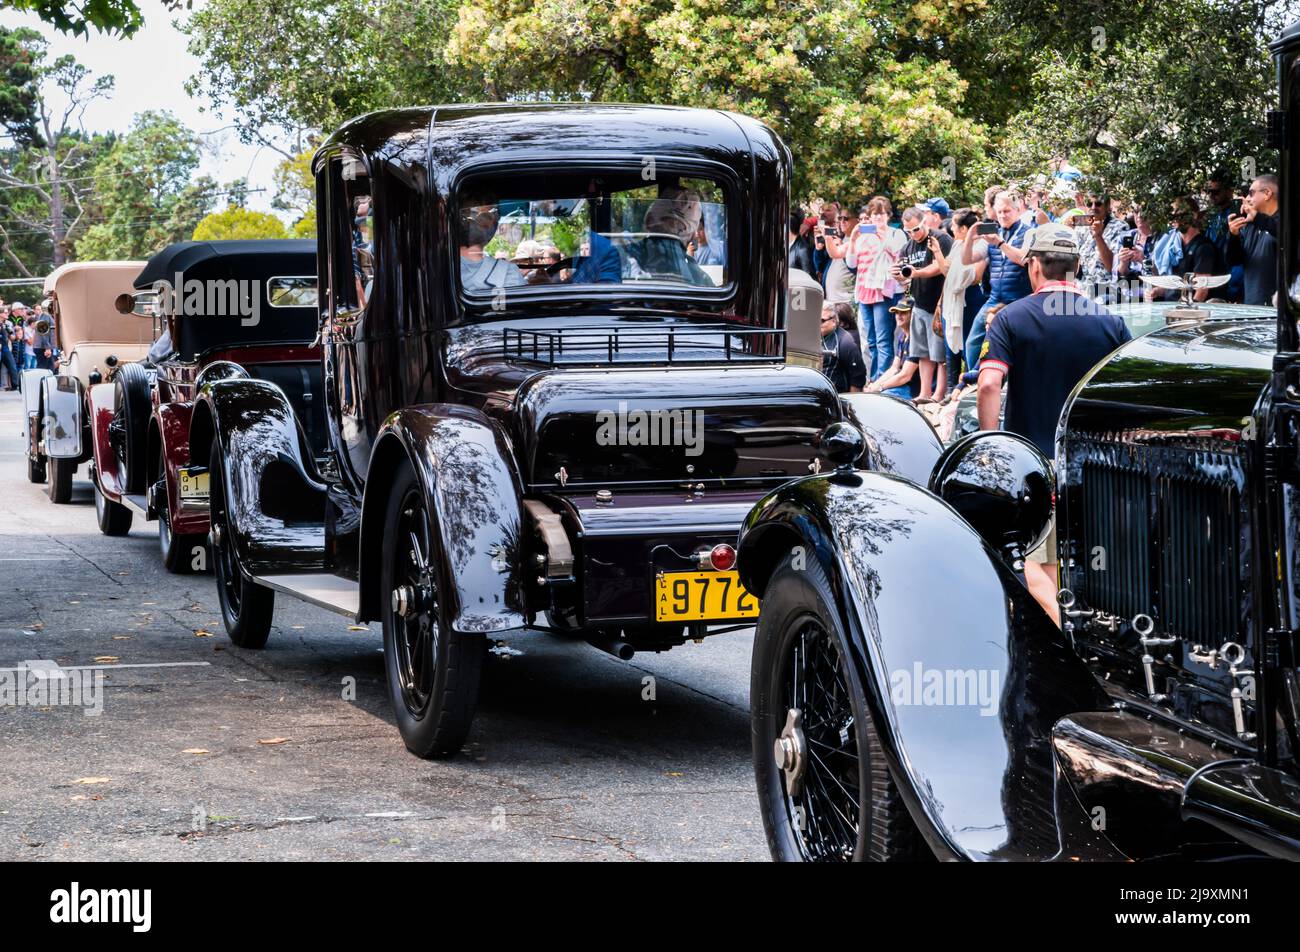 The Pebble Beach Concours d'Elegance event on Ocean Avenue in Carmel-by-the-Sea during Monterey car week Stock Photo